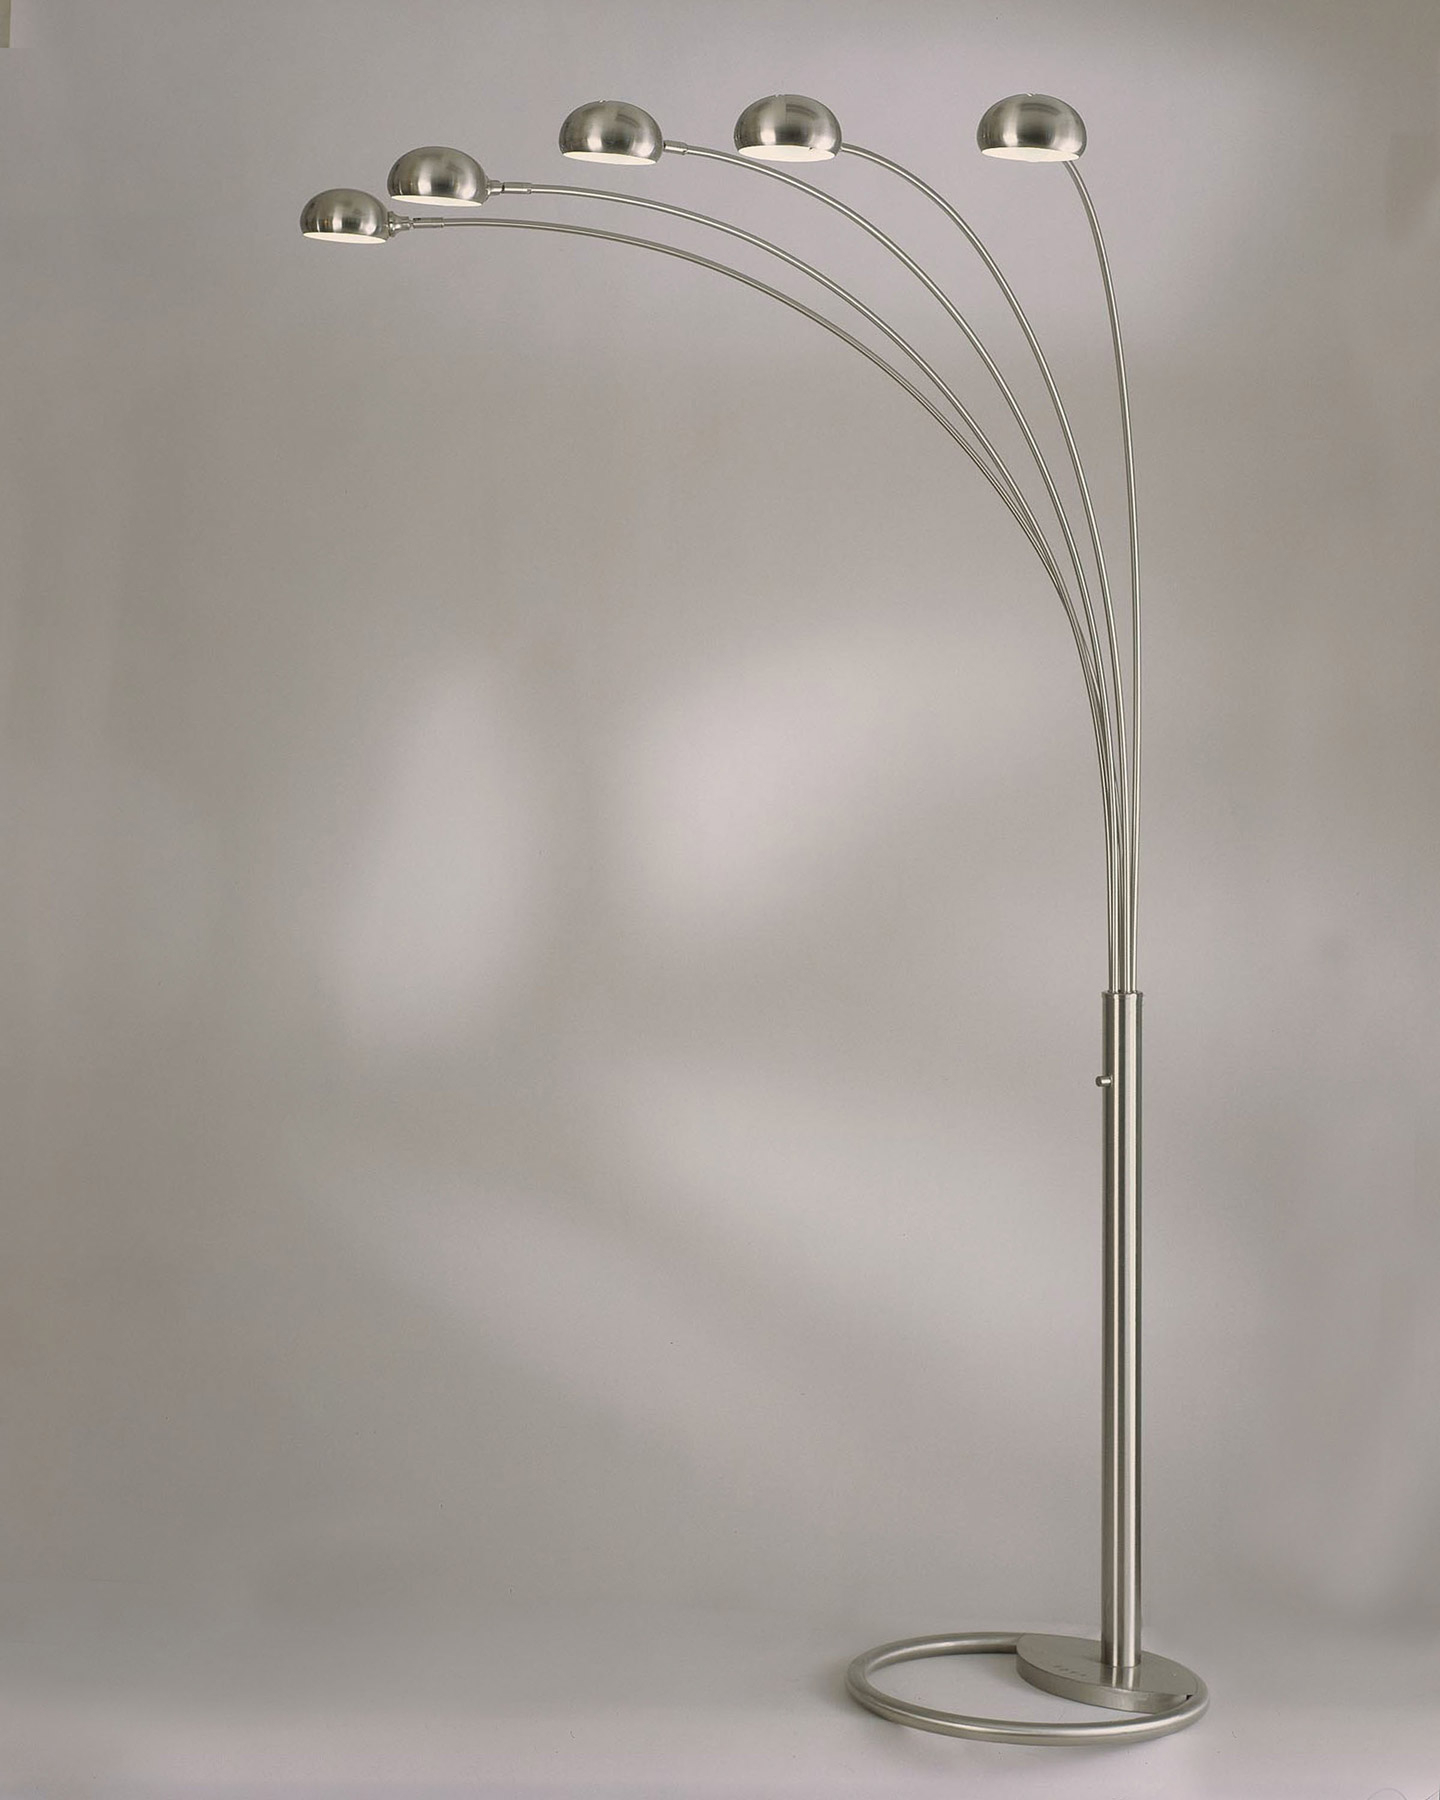 5 Bulb Floor Lamp A Sense Of Beauty For Your Space inside dimensions 1440 X 1800